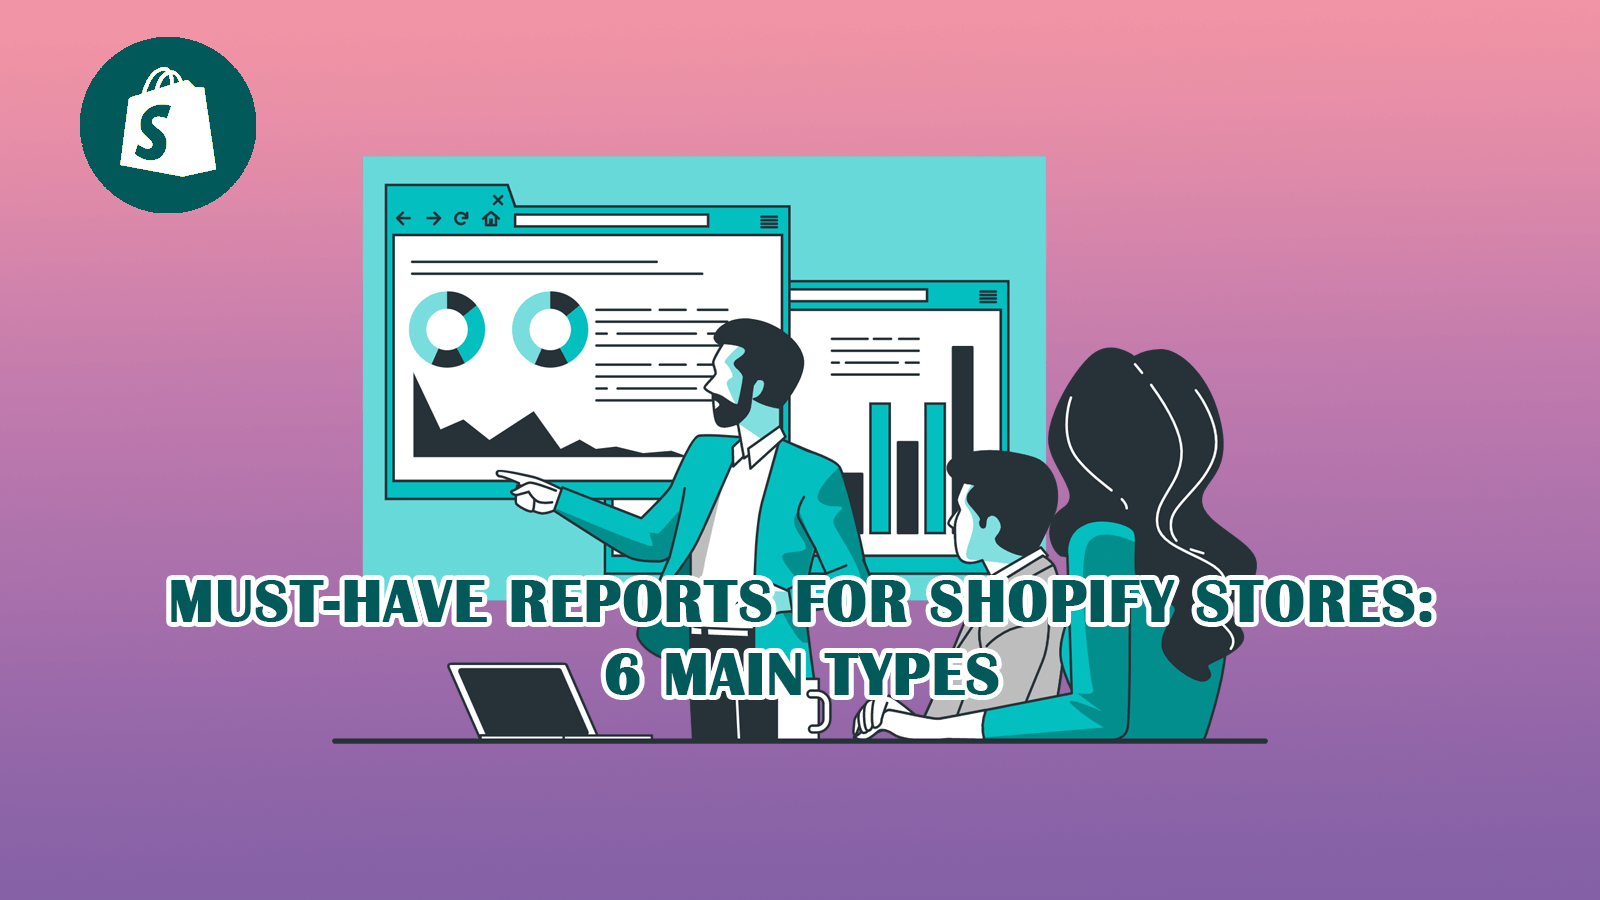 must-have-reports-for-shopify-stores-6-main-types--1-.png